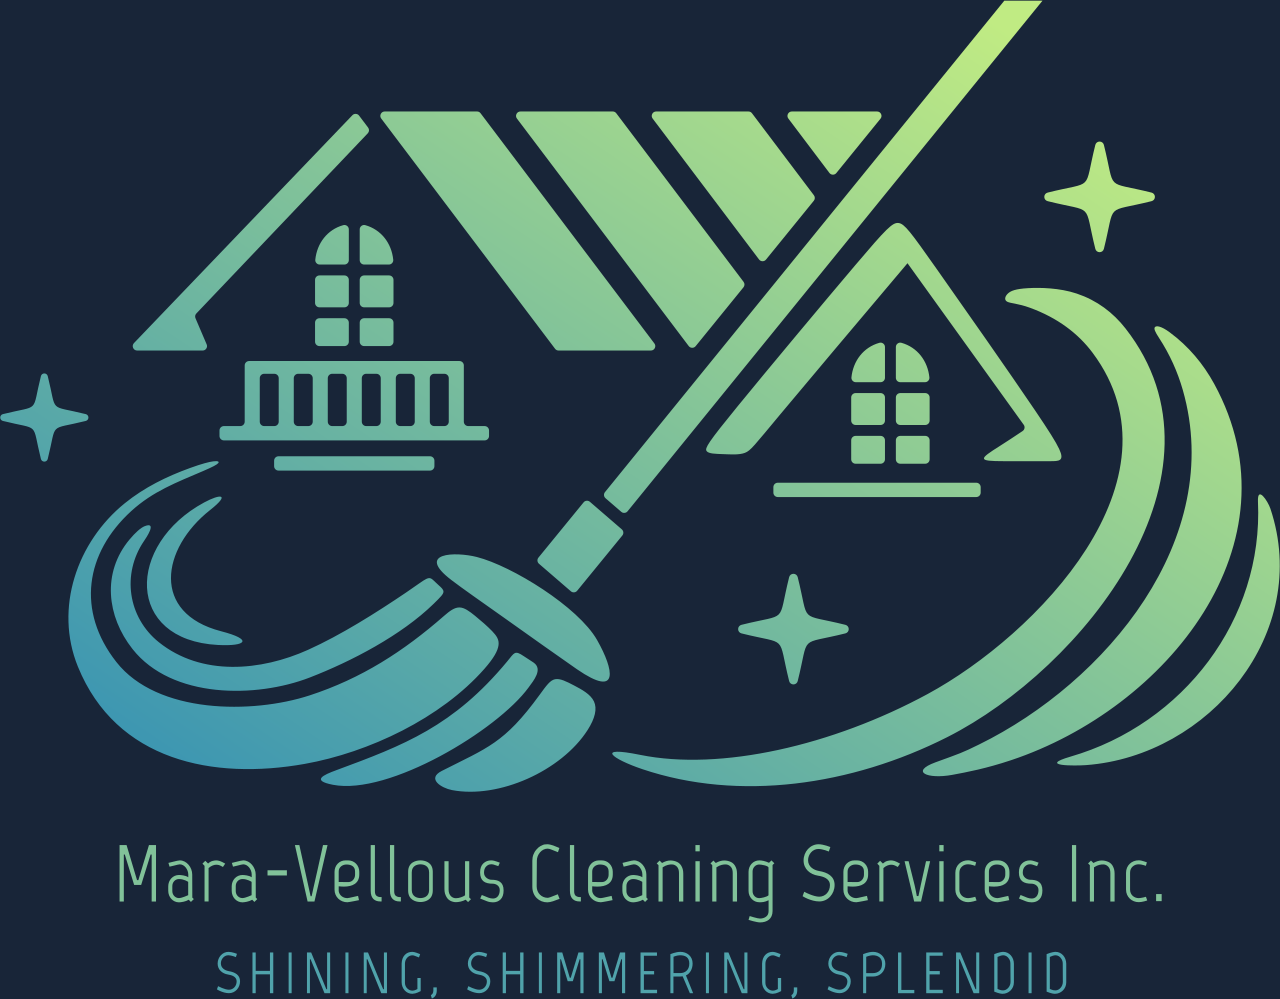 Mara-Vellous Cleaning Services Inc.'s web page